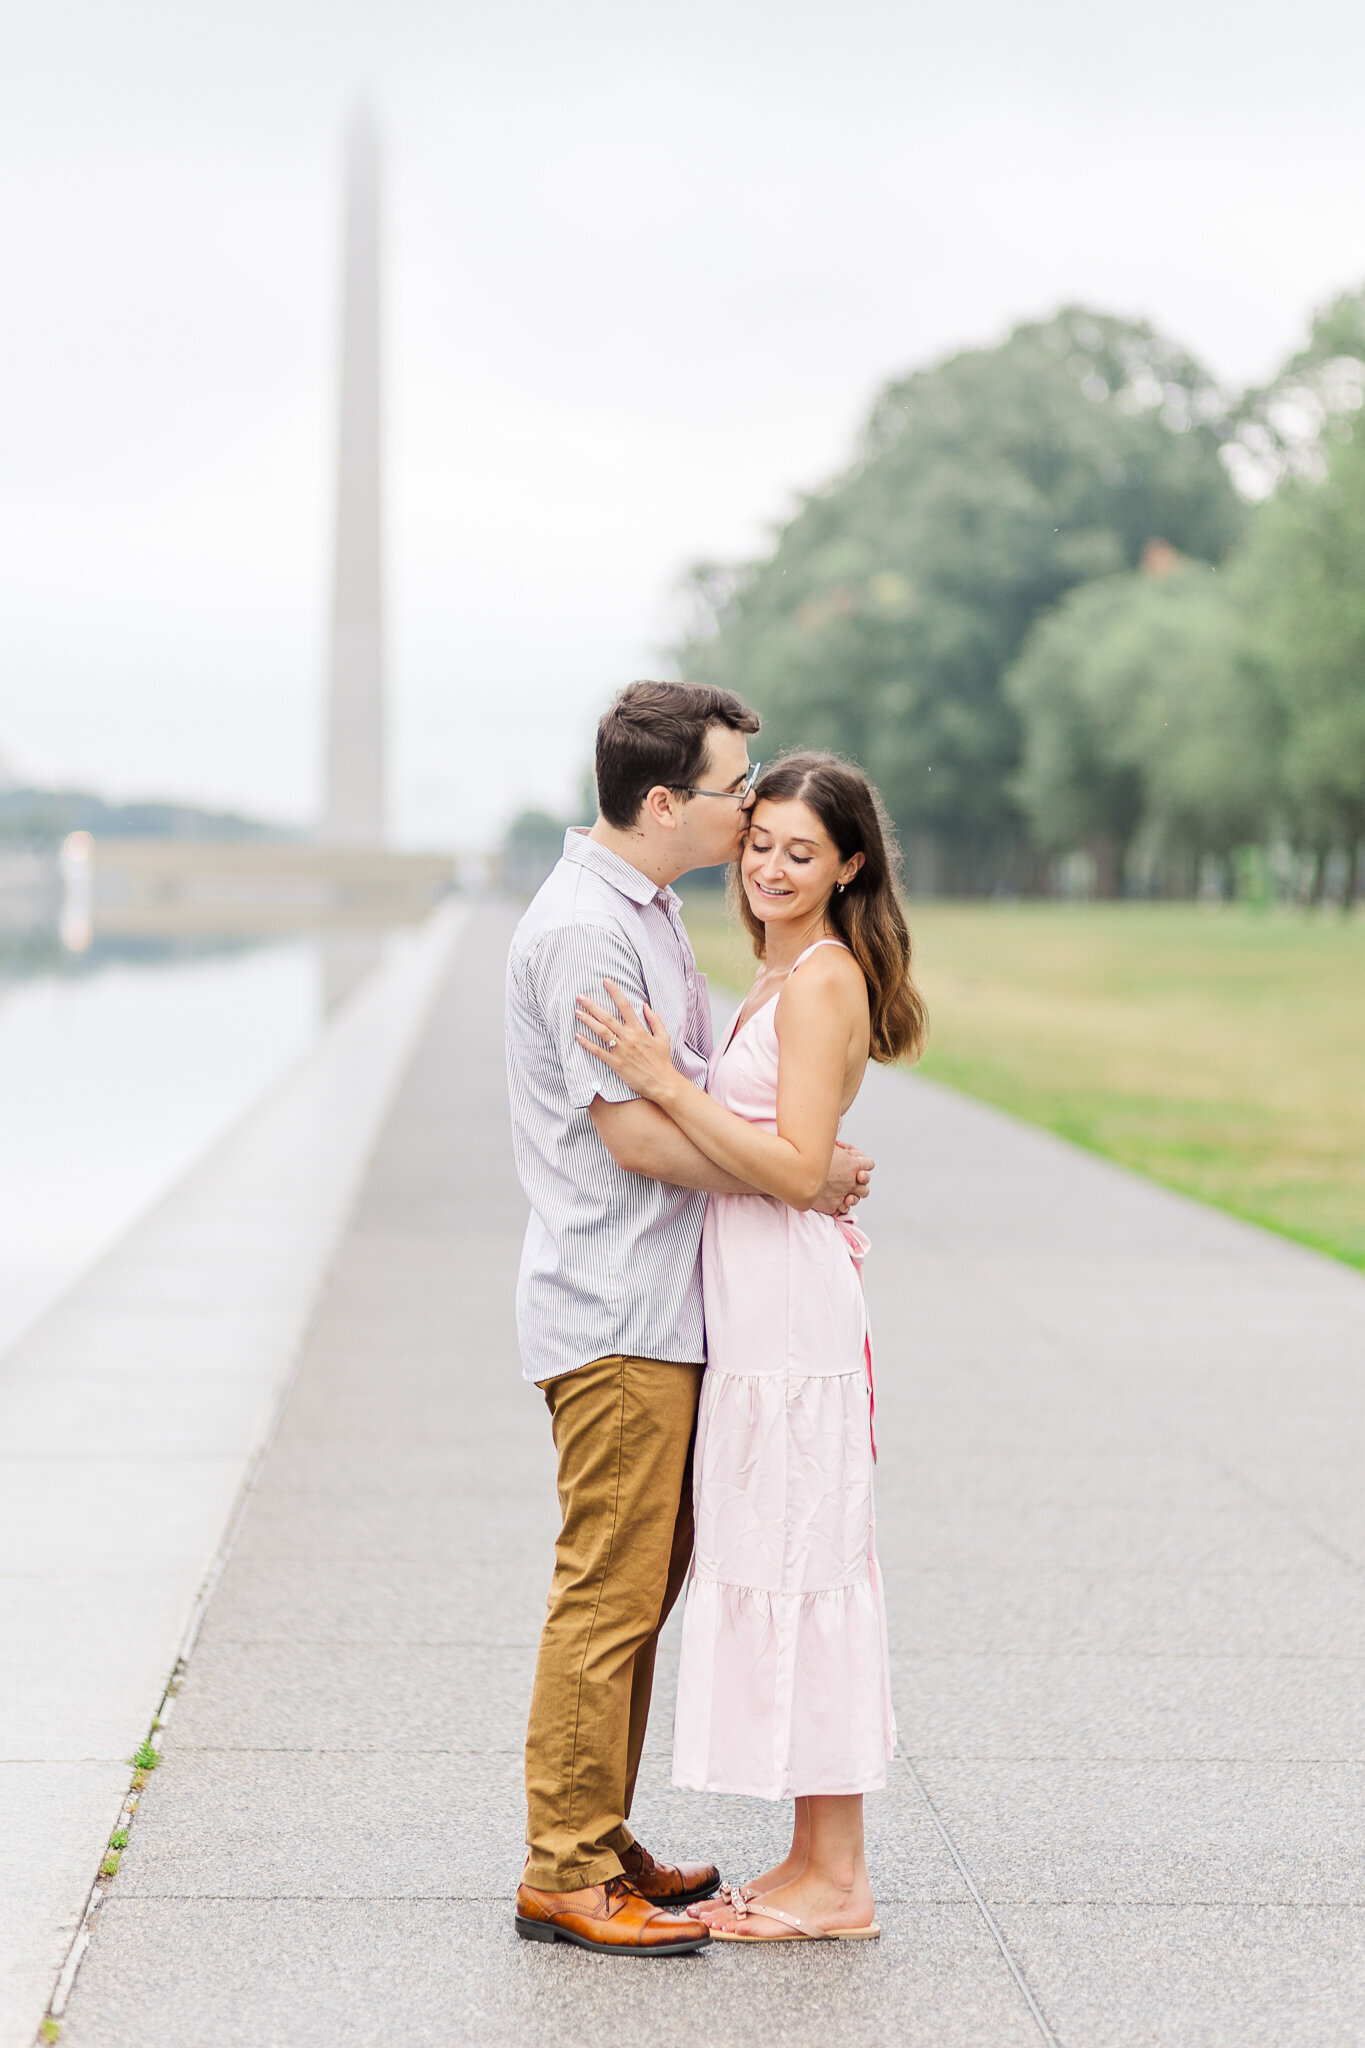 A man kisses his fiance on the temple with the Washington Monument in the background